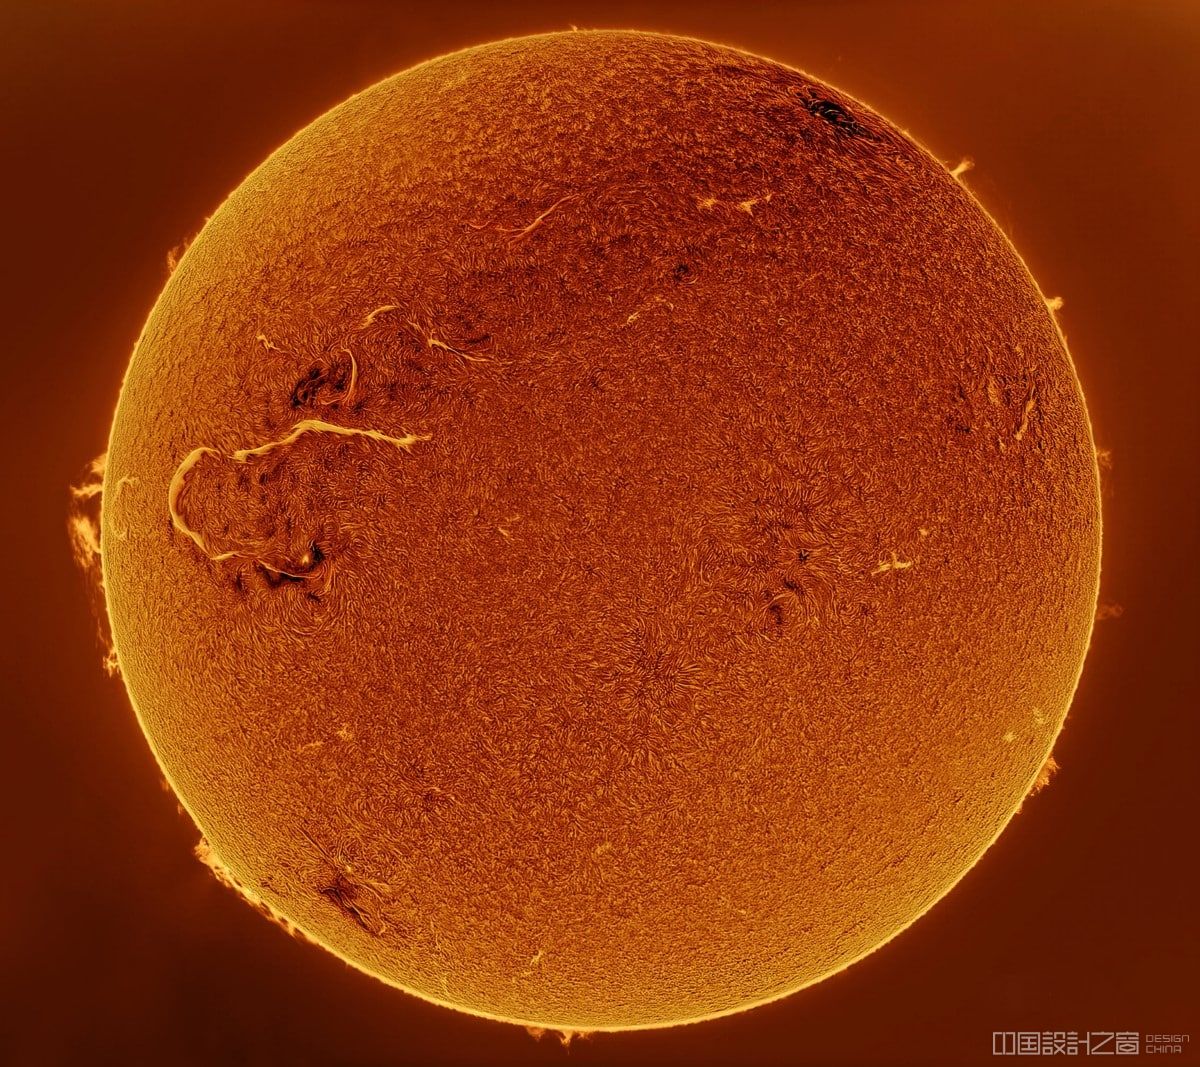 Sun photographed moving towards its maximum cycle